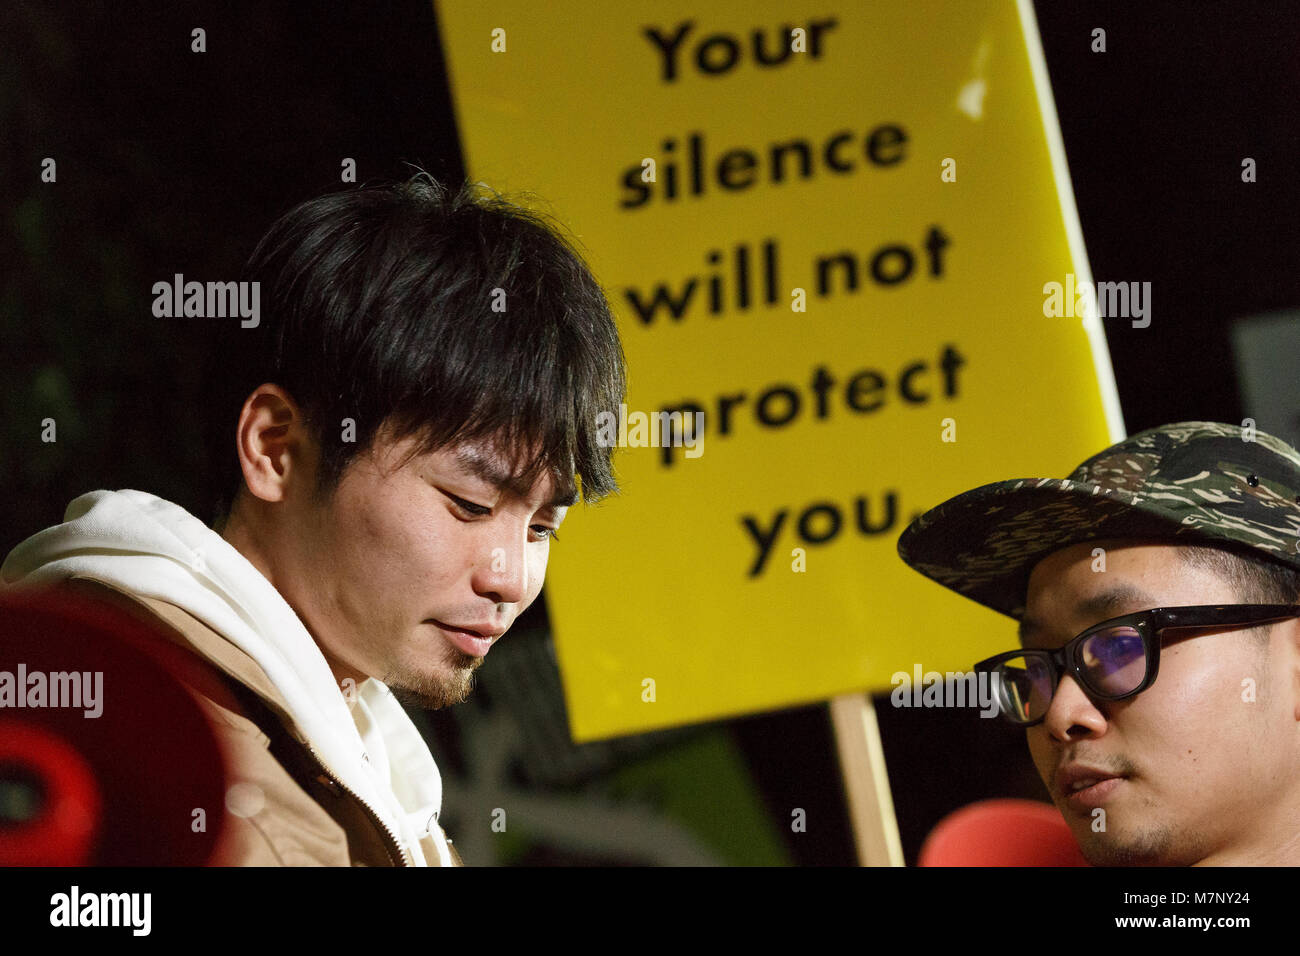 Aki Okuda (L), a former founding member of the Japanese students protest group Students Emergency Action for Liberal Democracy (SEALDs), attends a protest in front of the Prime Minister's Office after Japan's Finance Ministry admitted to altering records linking the Prime Minister's wife, Akie, to the Moritomo Gakuen scandal, March 12, 2018, Tokyo, Japan. It was revealed that Akie Abe's name was removed from documents detailing special treatment of Moritomo Gakuen. Prime Minister Shinzo Abe has constantly denied that neither he nor his wife had played a role in the sale of heavily discounted p Stock Photo